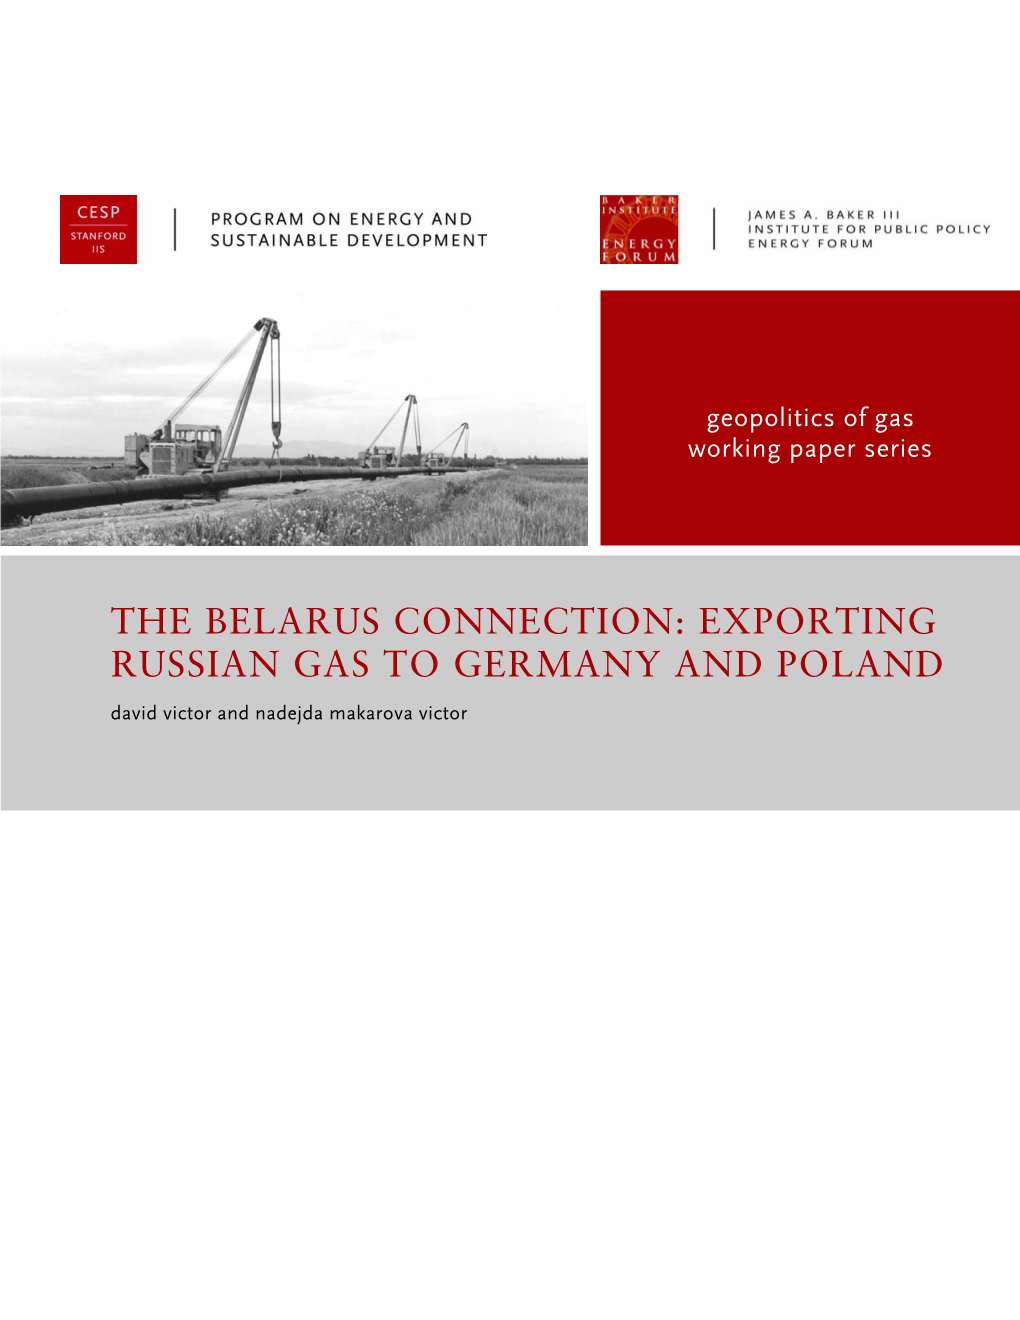 THE BELARUS CONNECTION: EXPORTING RUSSIAN GAS to GERMANY and POLAND David Victor and Nadejda Makarova Victor